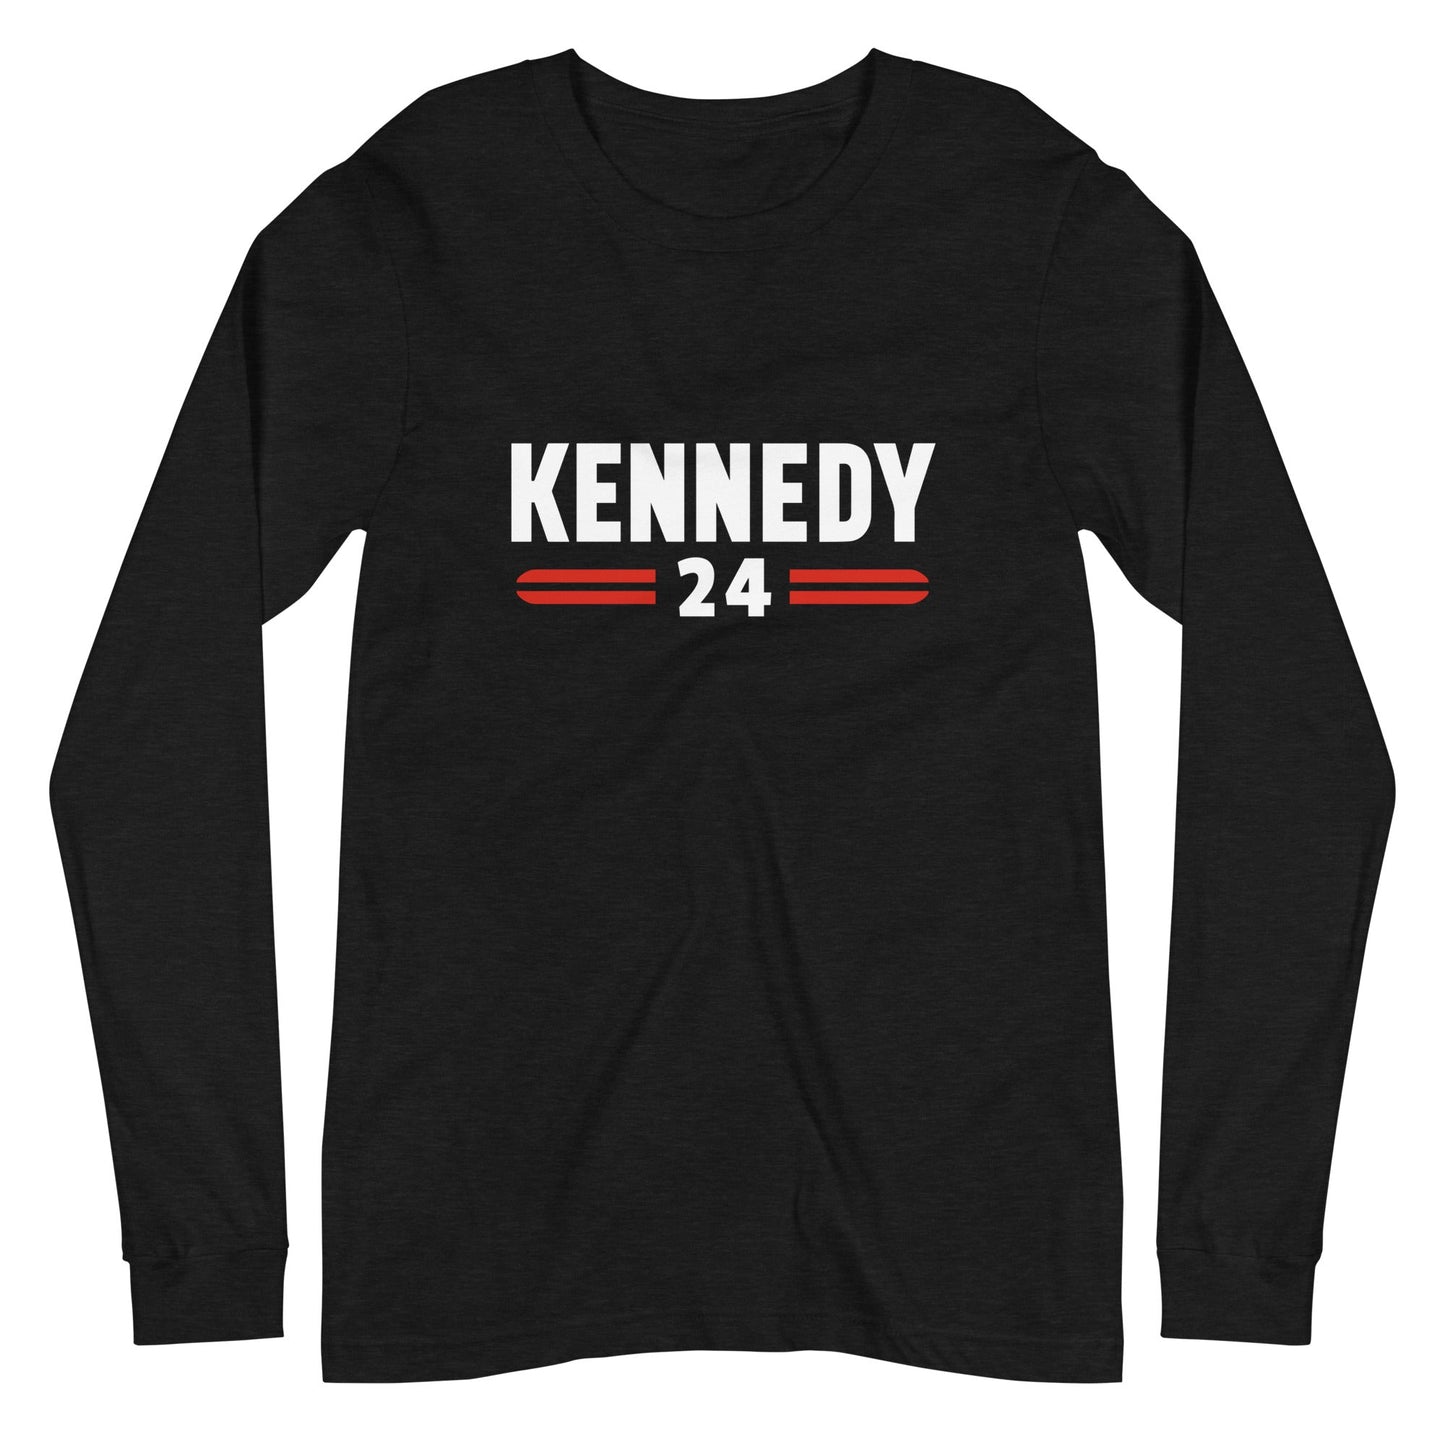 Kennedy Classic Unisex Long Sleeve Tee - TEAM KENNEDY. All rights reserved